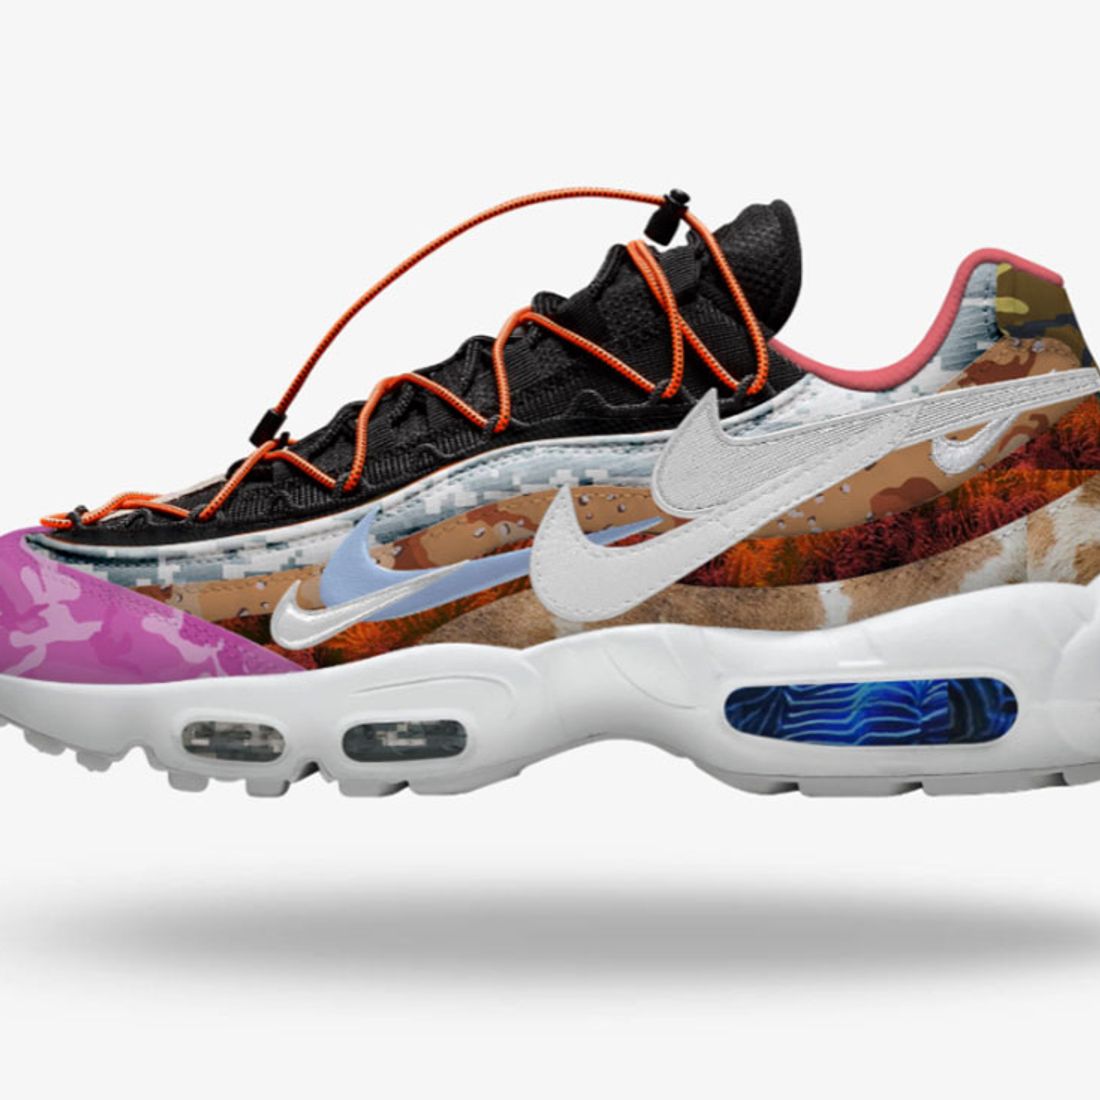 Create Own Nike Air Max 95 Sports to Win a Pair Designed by ONEFOUR! - Sneaker Freaker